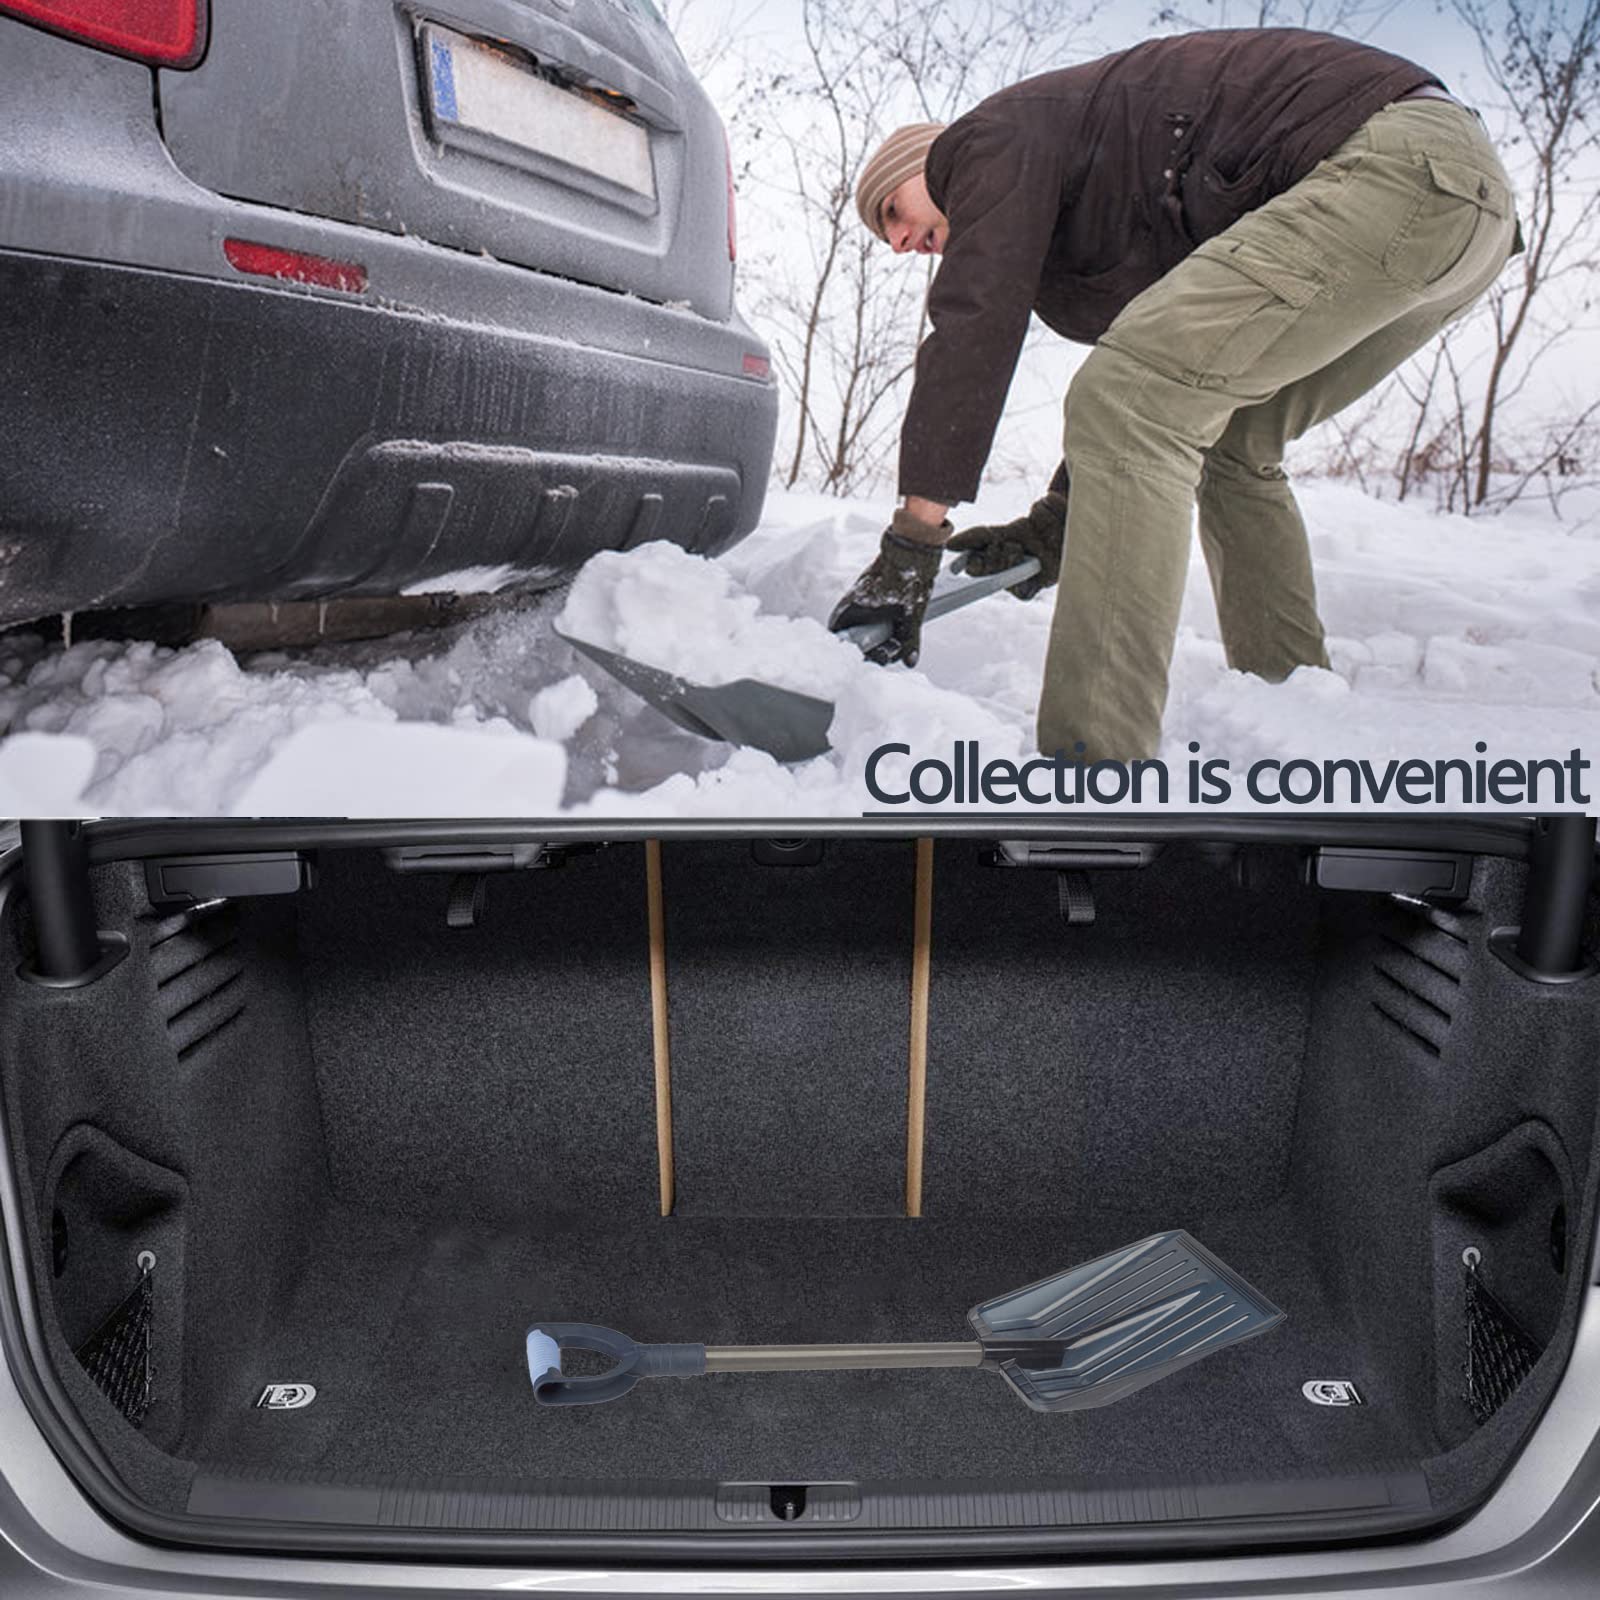 Emergency Snow Shovel, NOSTIFY 32 inch Lightweight Iron Shaft Shovel, Portable Snow Removal for Car Driveway Home Garage and Outdoor Activities